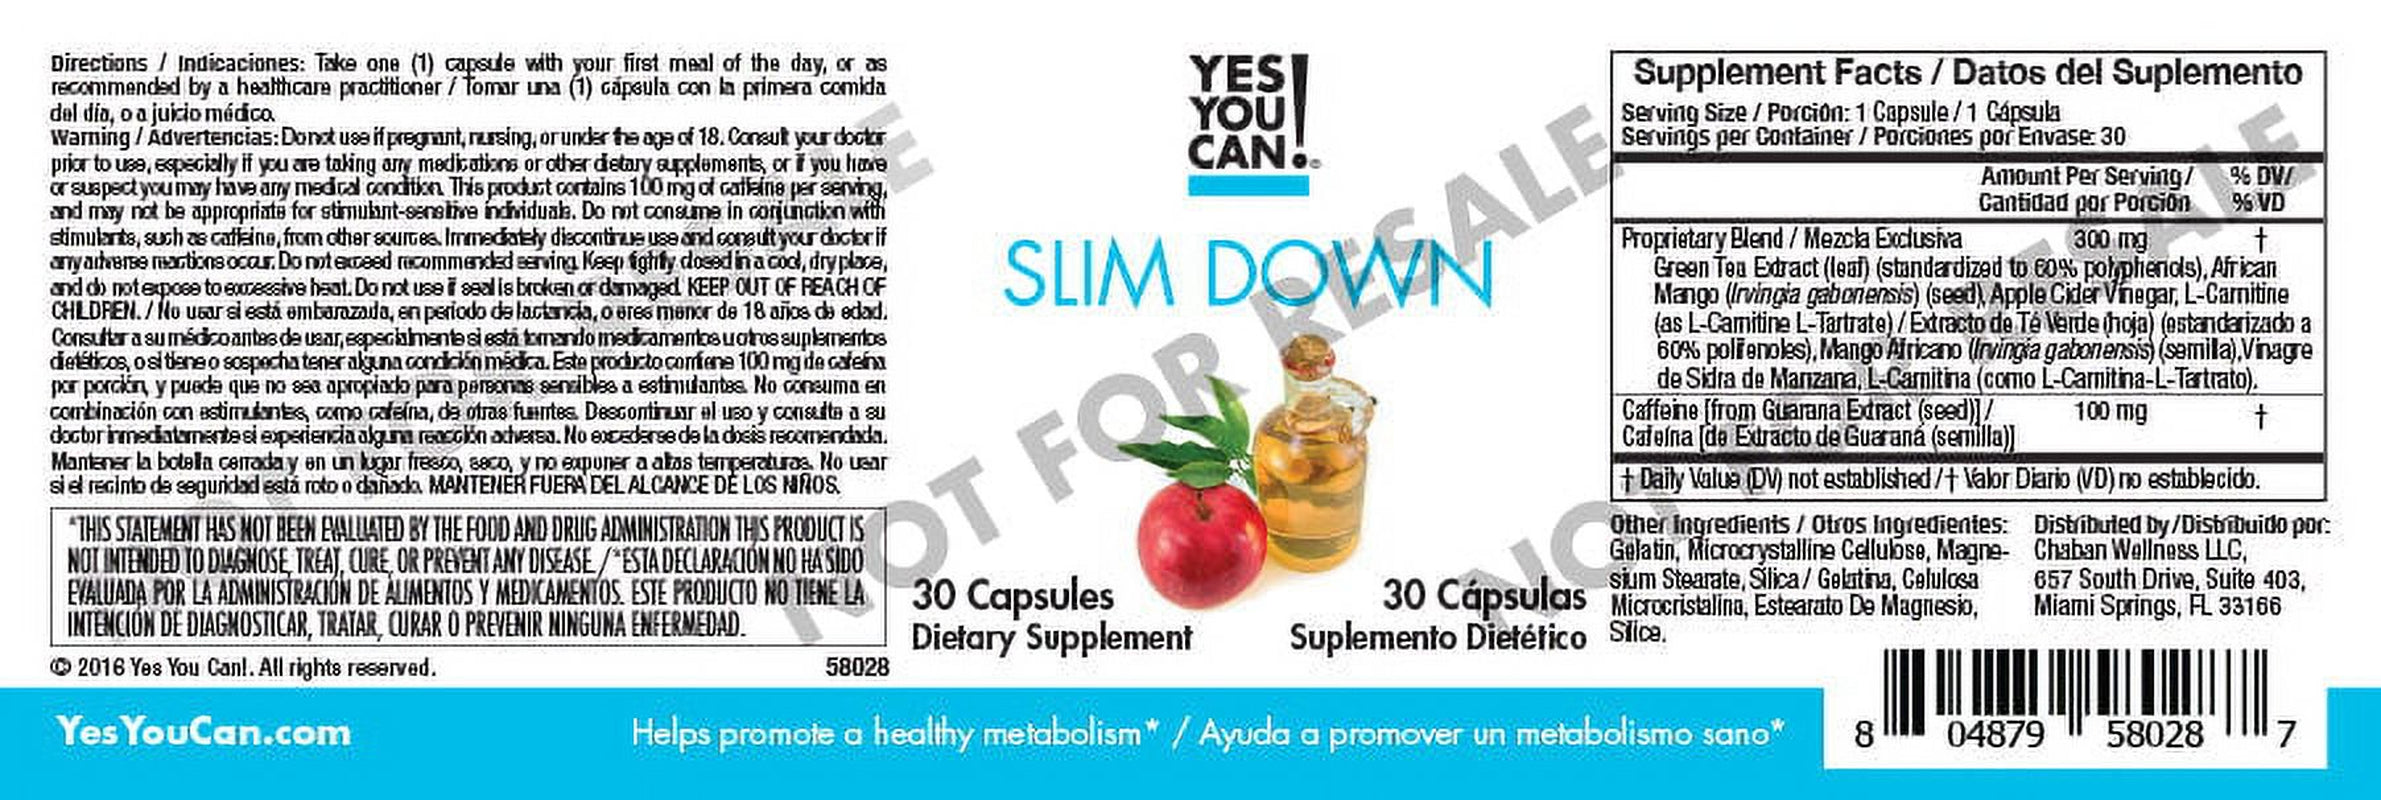 Yes You Can! Weight Loss Diet Supplement Kit Made with High-Quality Ingredients - Bundle Includes: (One Slim Down, One Appetite Support, One Collagen, One Colon Optimizer) - 30 Servings